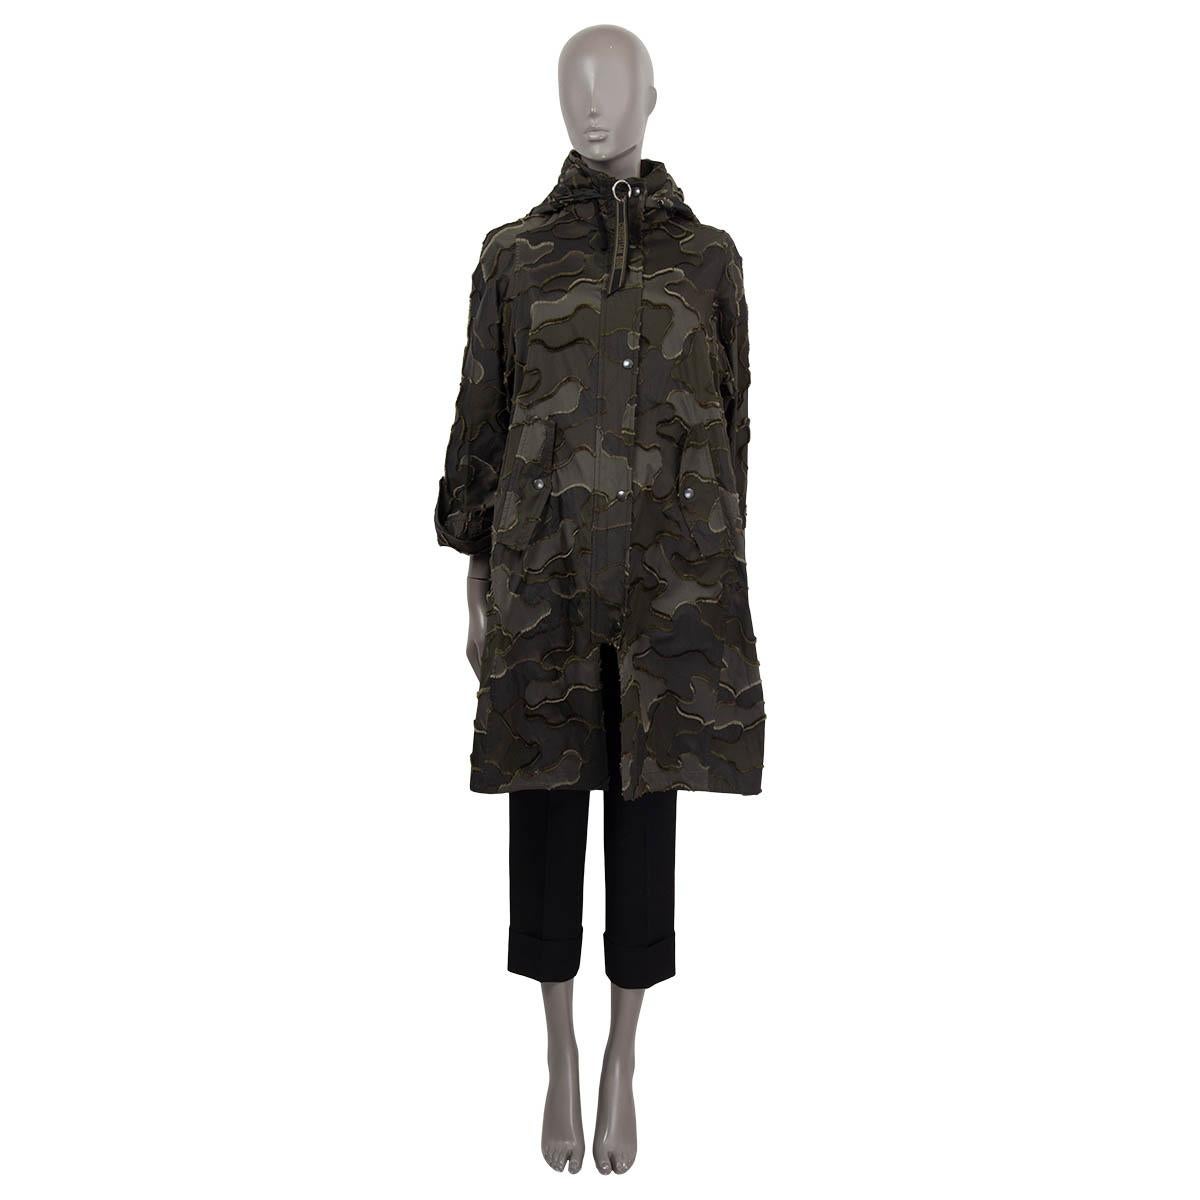 100% authentic Christian Dior camouflage oversized parka in olive green and forest polyester (100%). Features two pockets in the front with snap buttons. Opens with a black zipper and snap buttons on the front. Has been worn and is in excellent